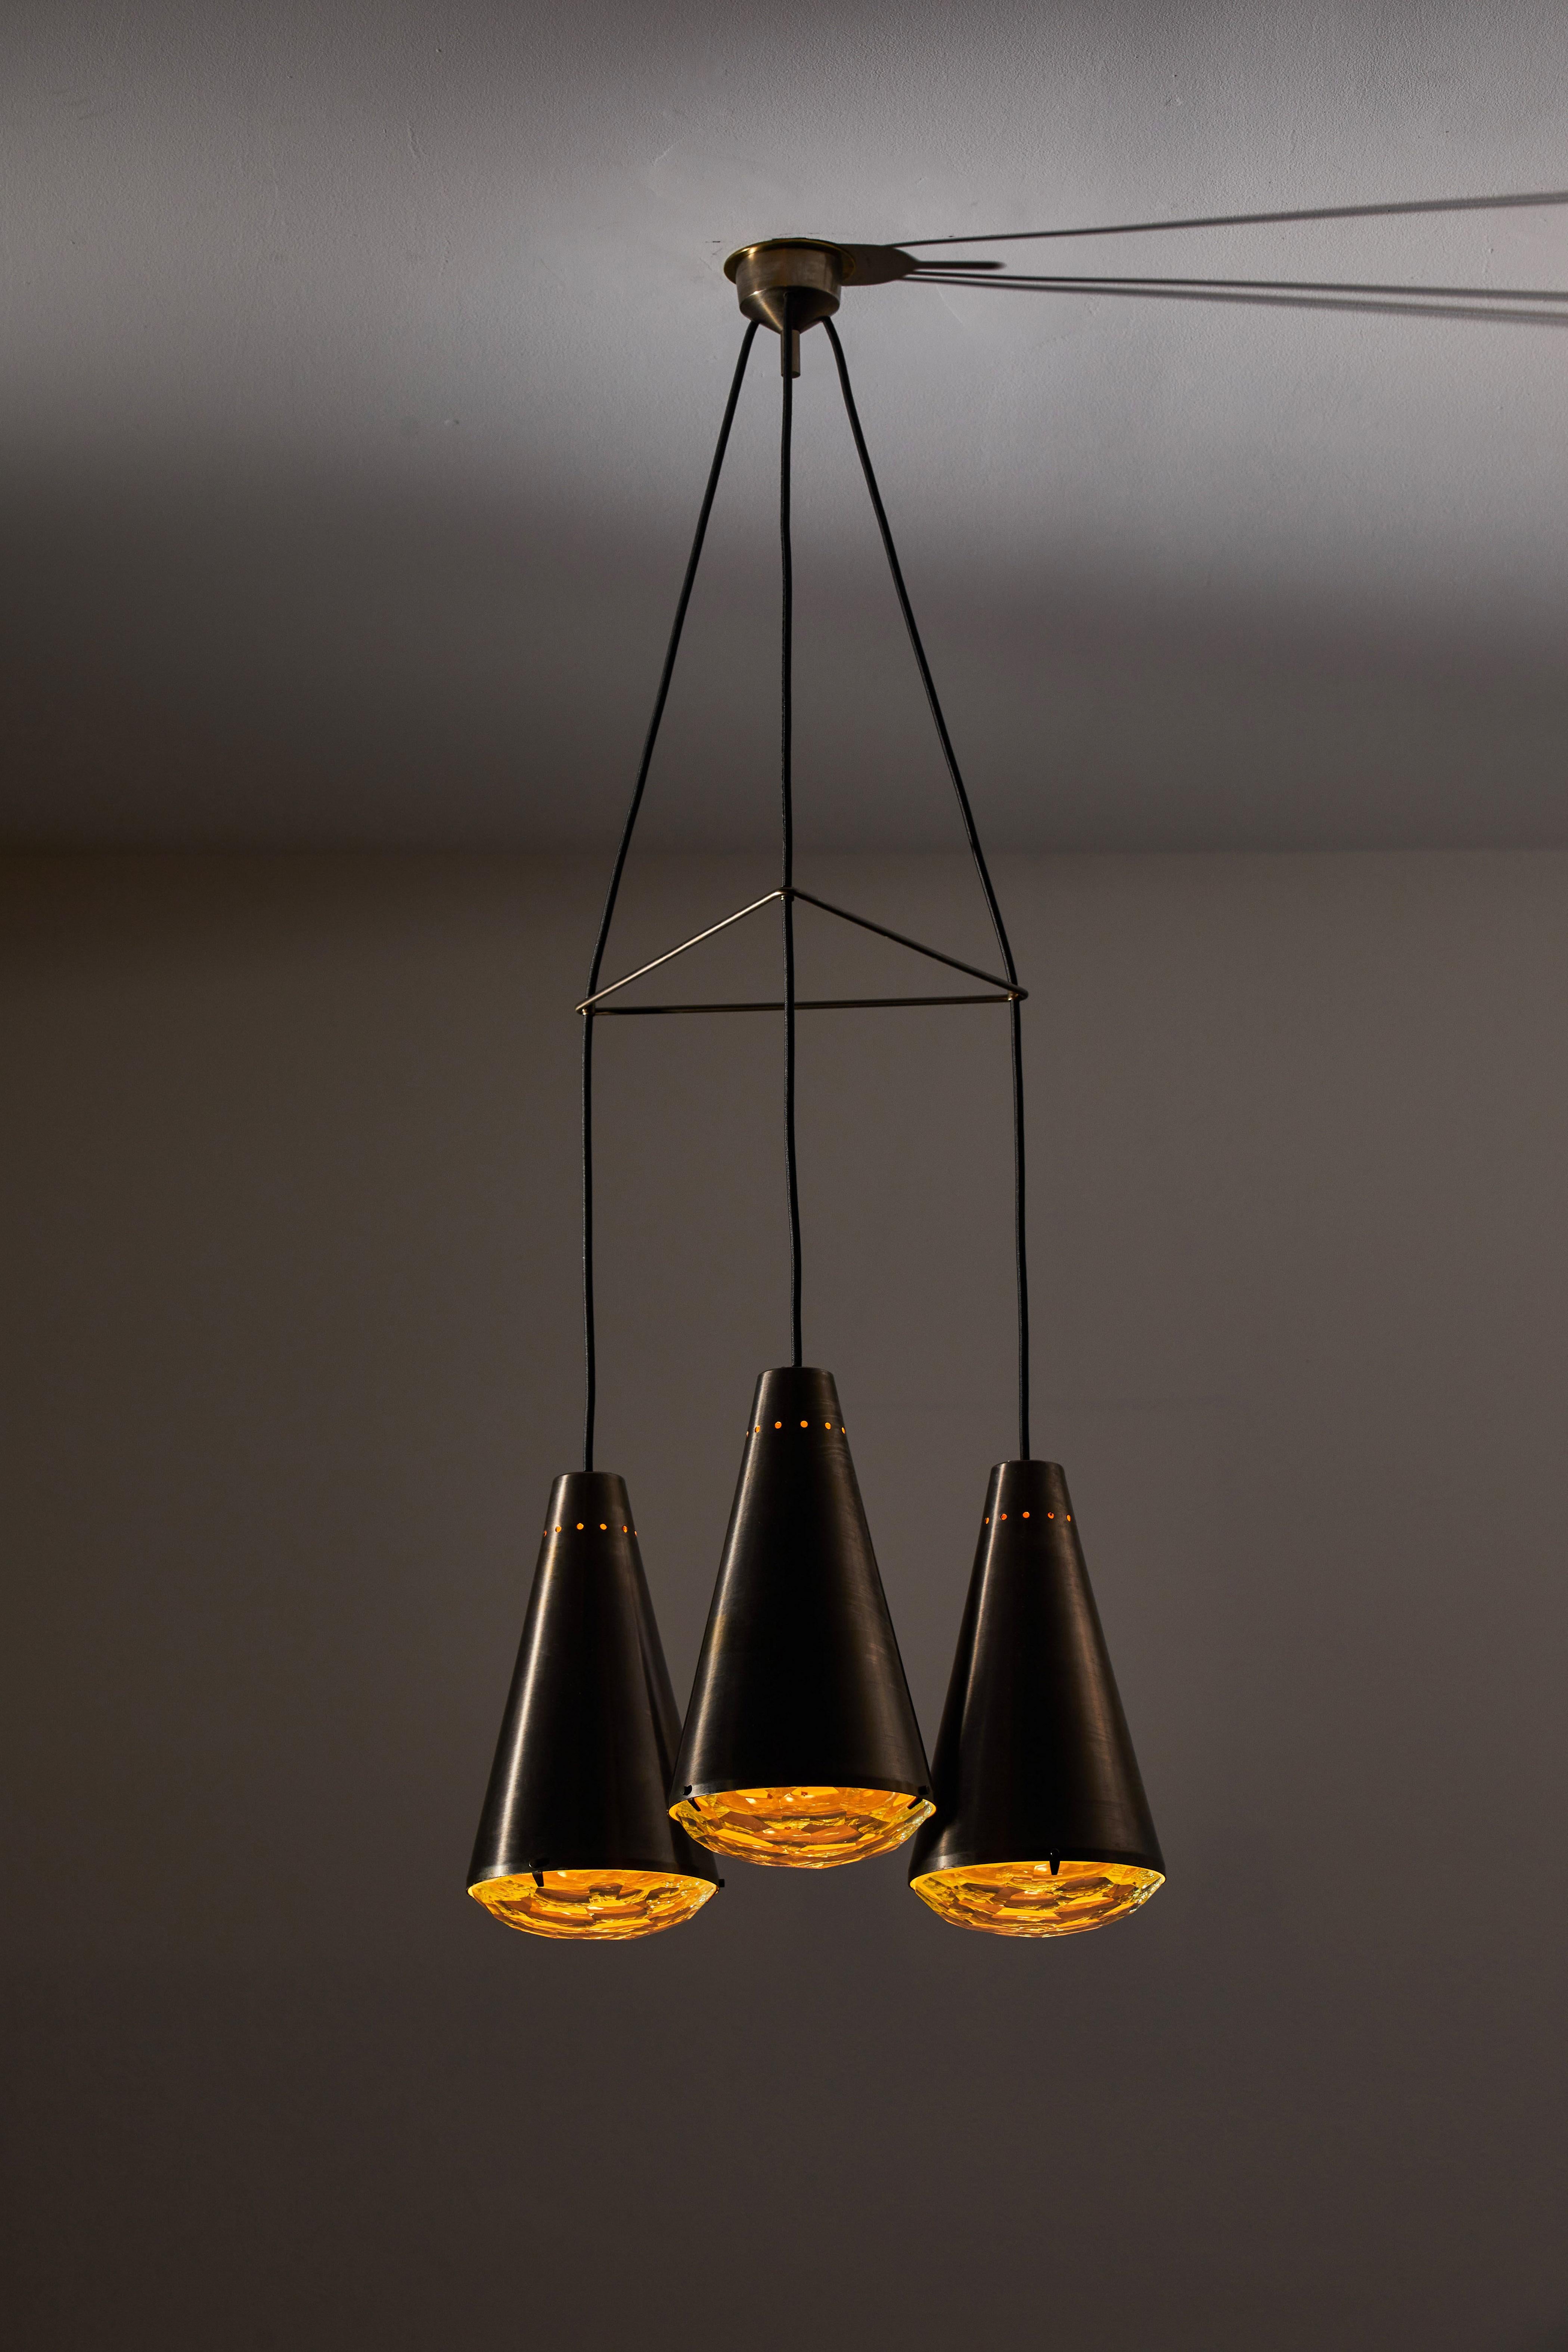 Suspension light by Max Ingrand for Fontana Arte. Designed and manufactured in Italy, in 1960. Nielloed metal frame, cut glass gem diffusers. Original canopy, custom brass ceiling plate. Wired for U.S. standards. We recommend three E27 60w maximum